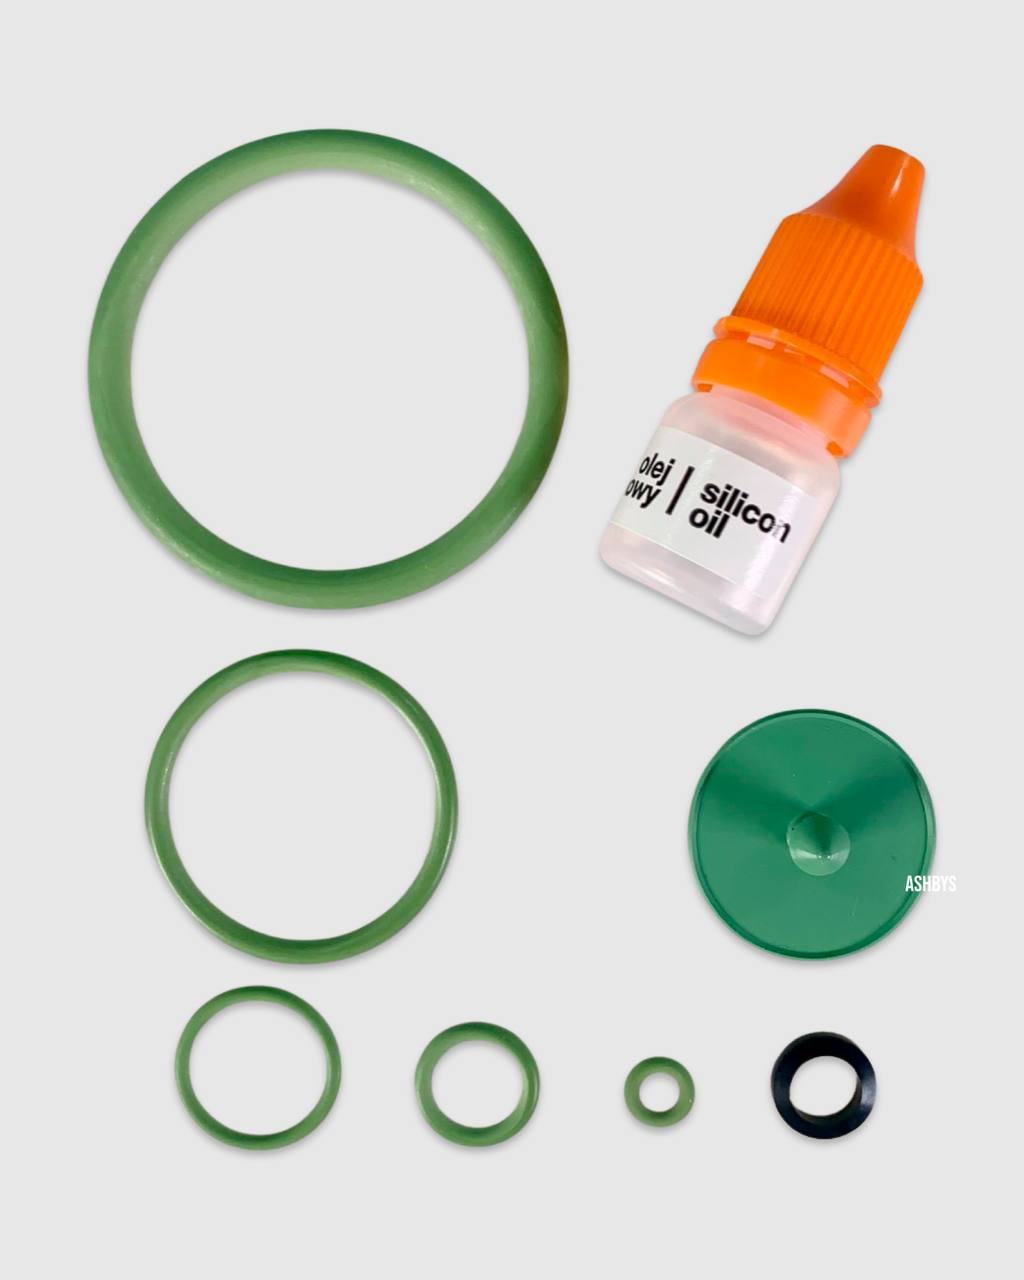 Replacement Viton Seal Kit - for XI6 / X16 6 Ltr Pump-up Sprayer